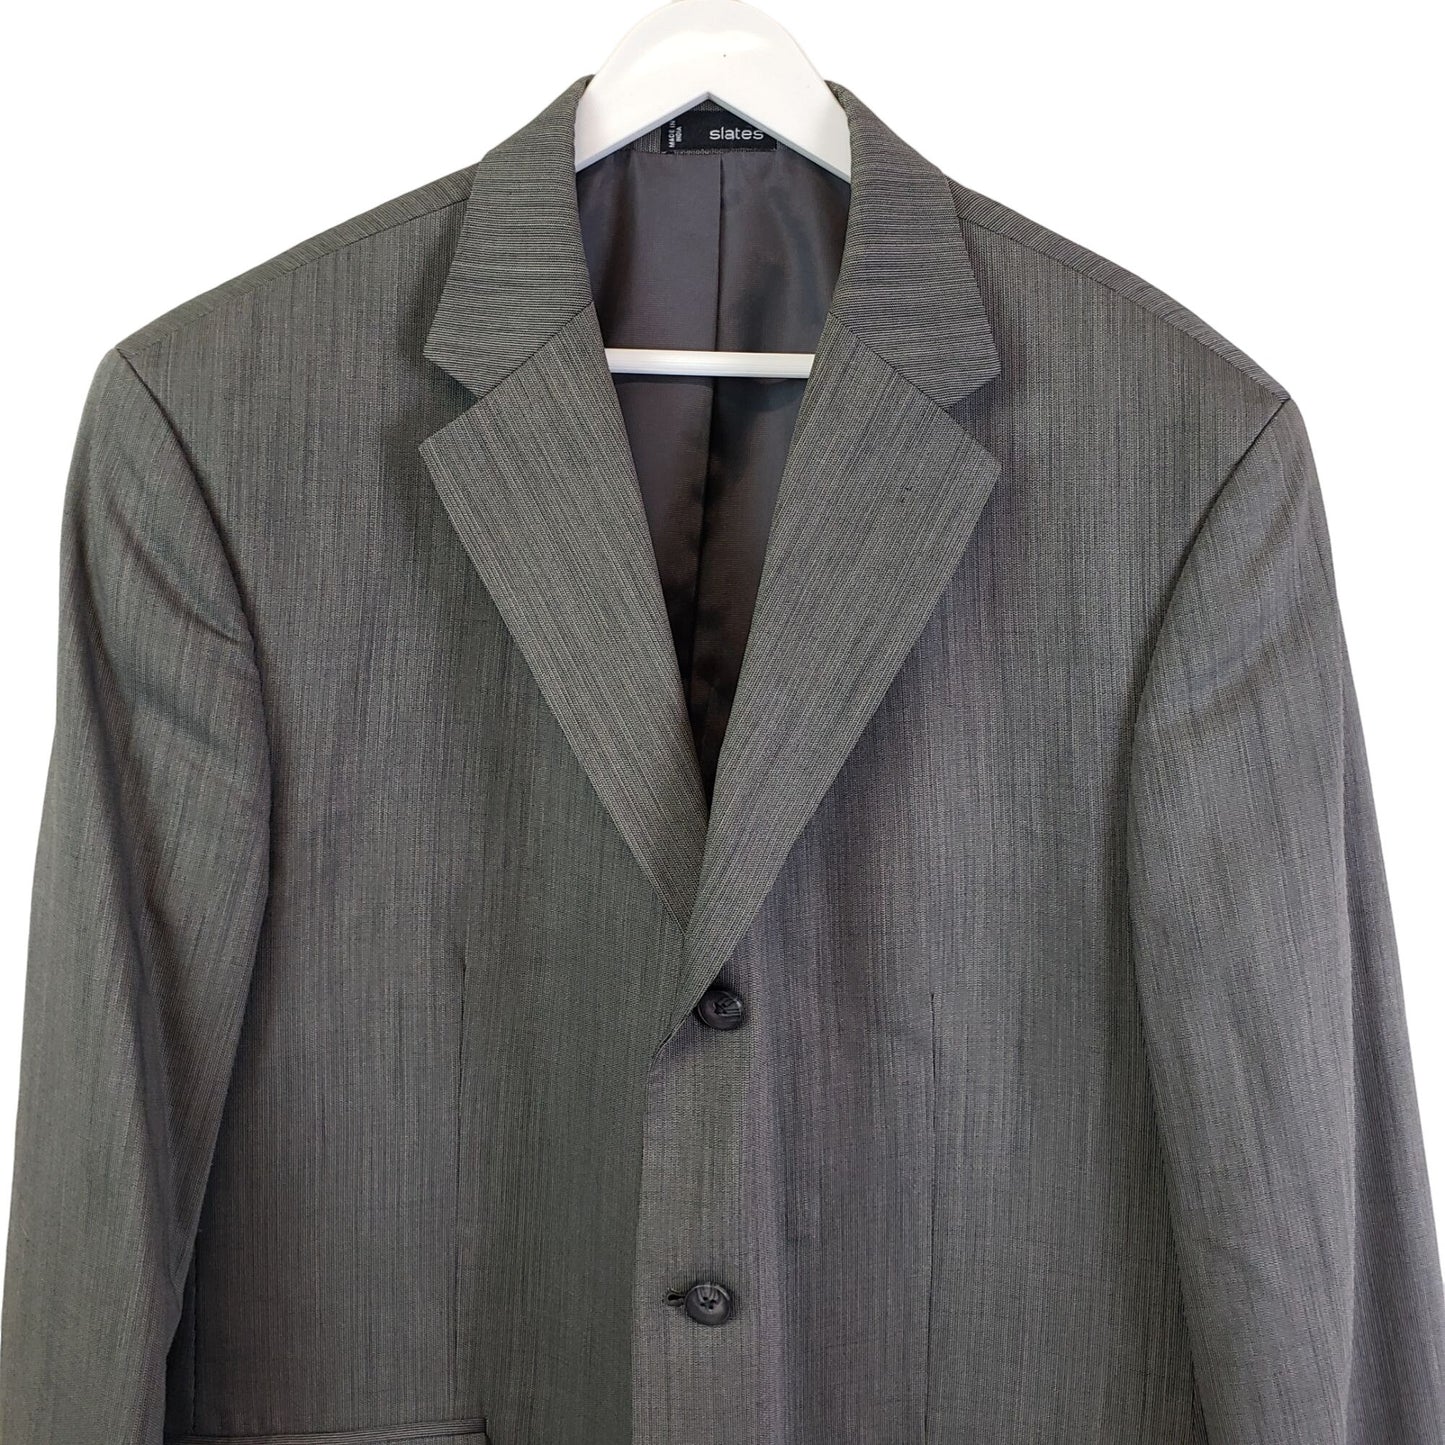 Slates Three Button Wool Suit Jacket Size 44R